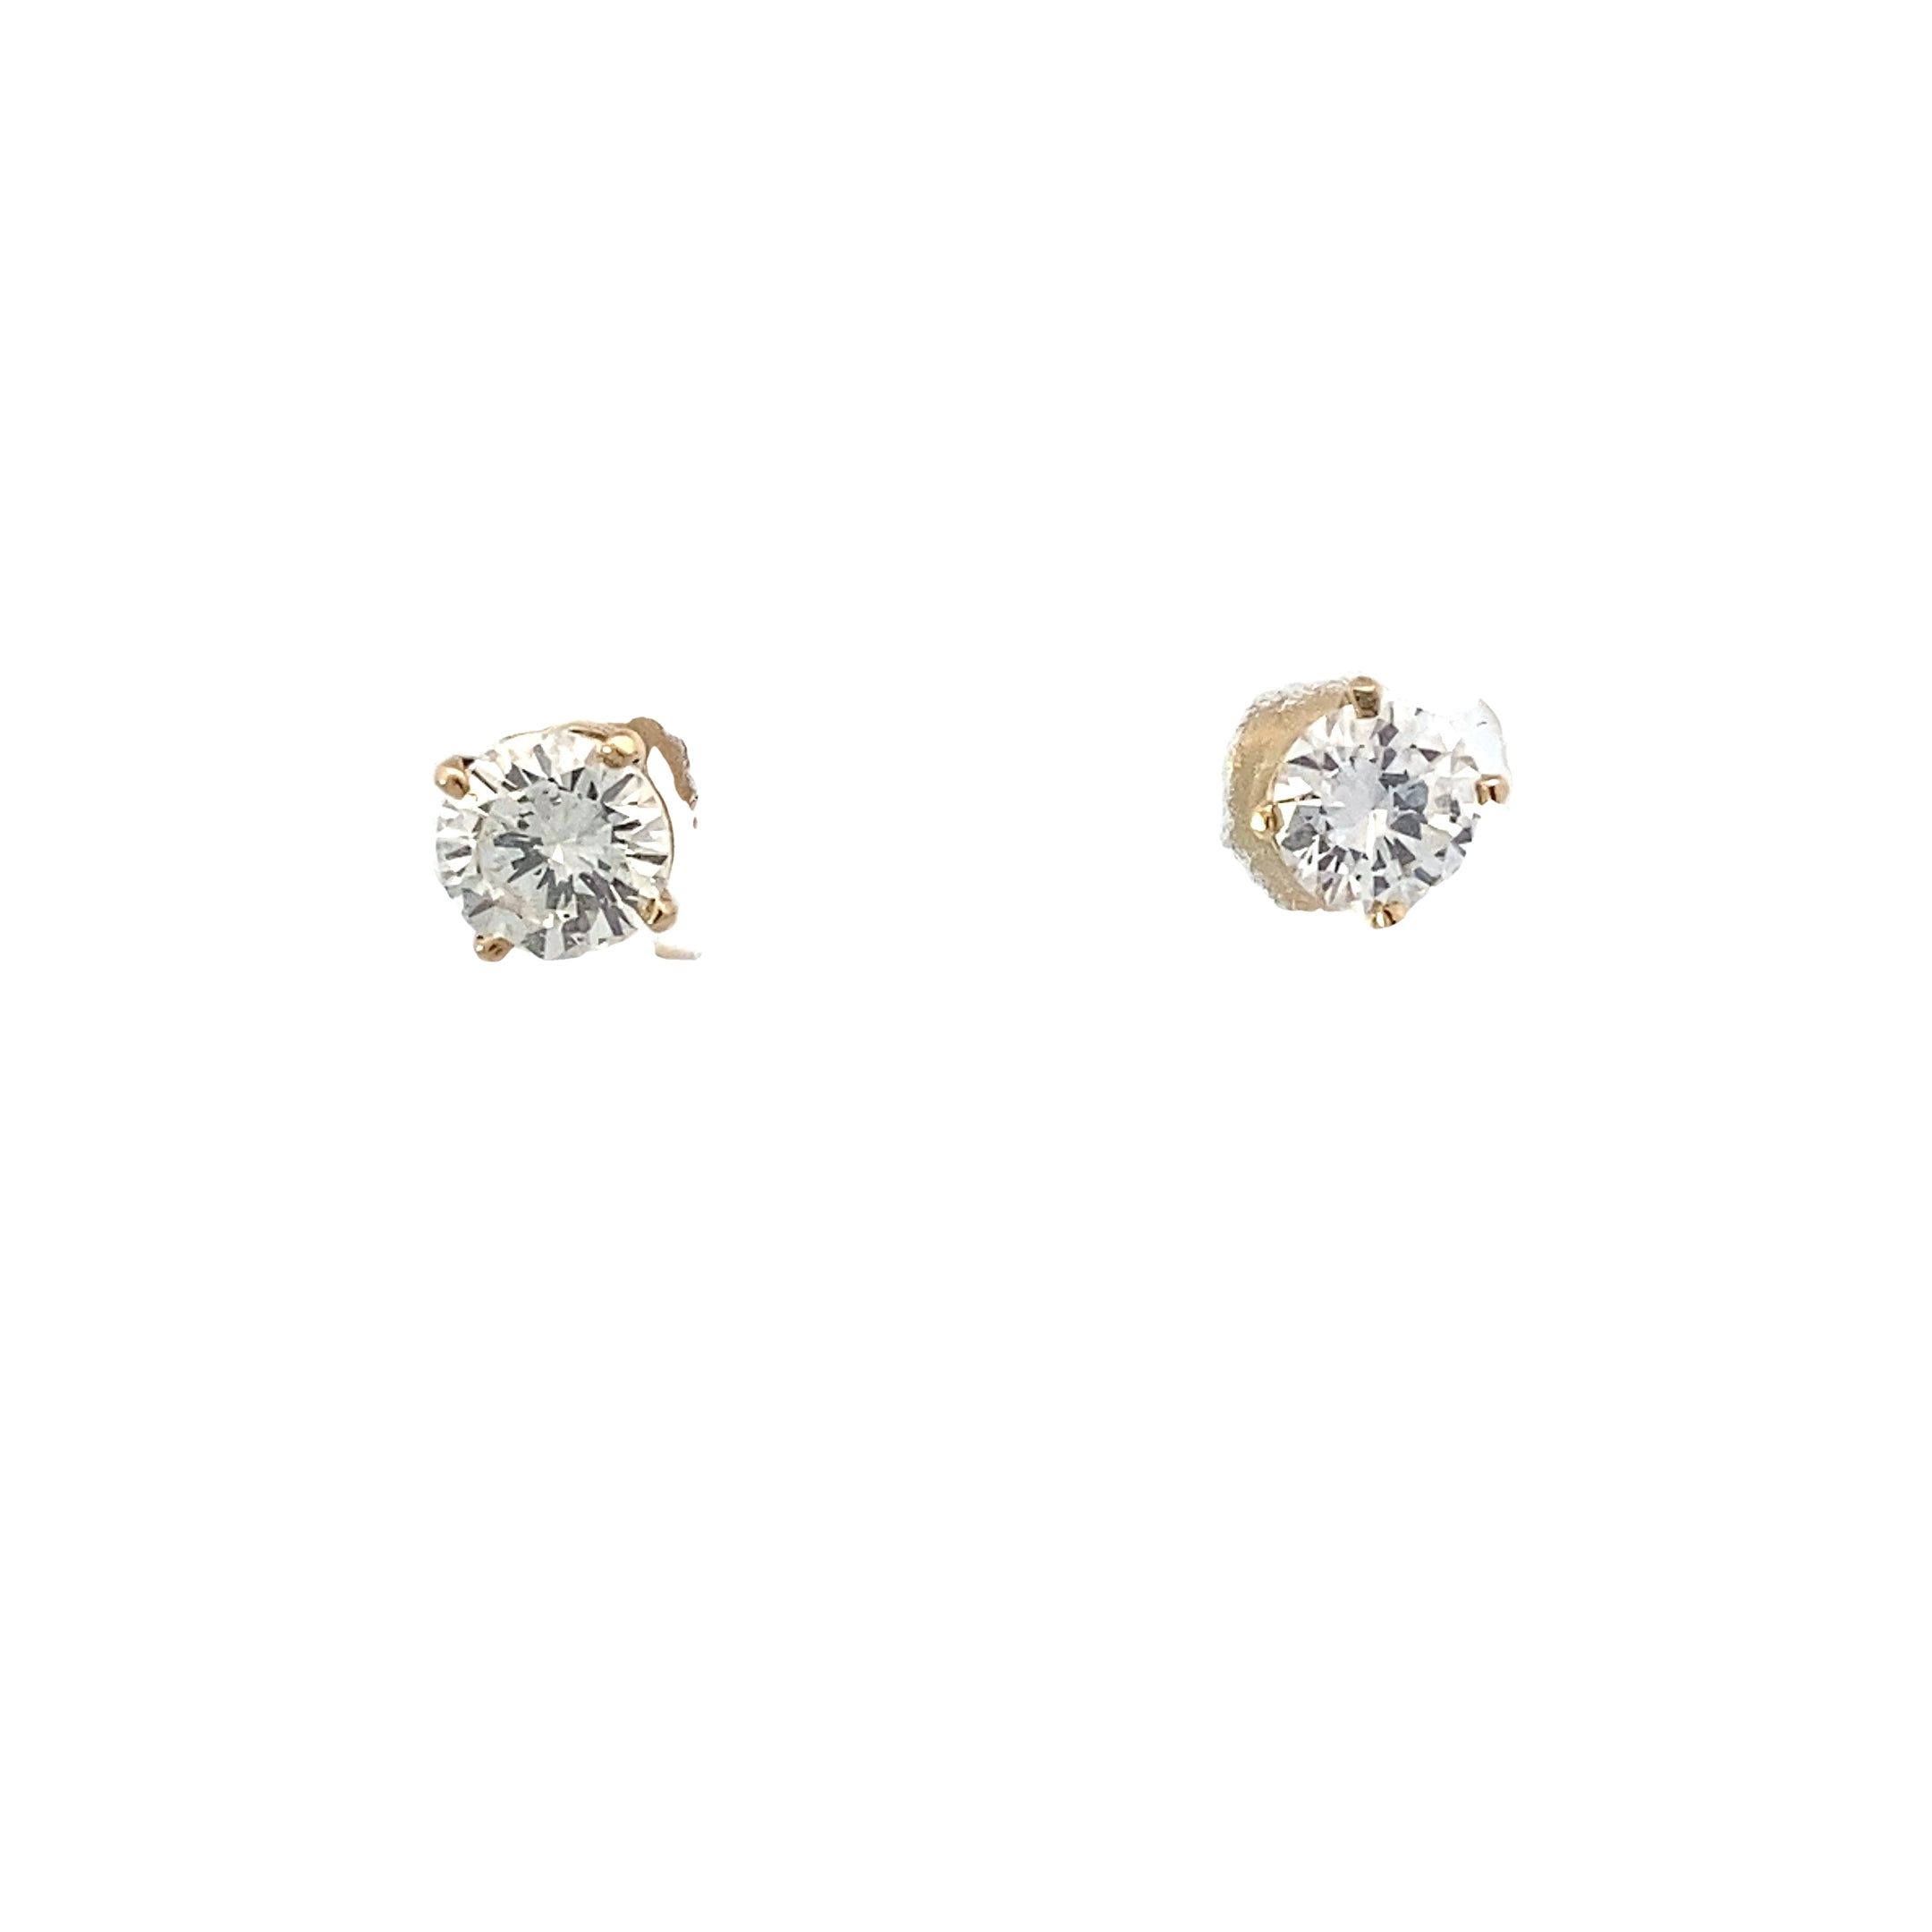 14K Yellow Gold Diamond Solitaire Earrings- 0.92ct